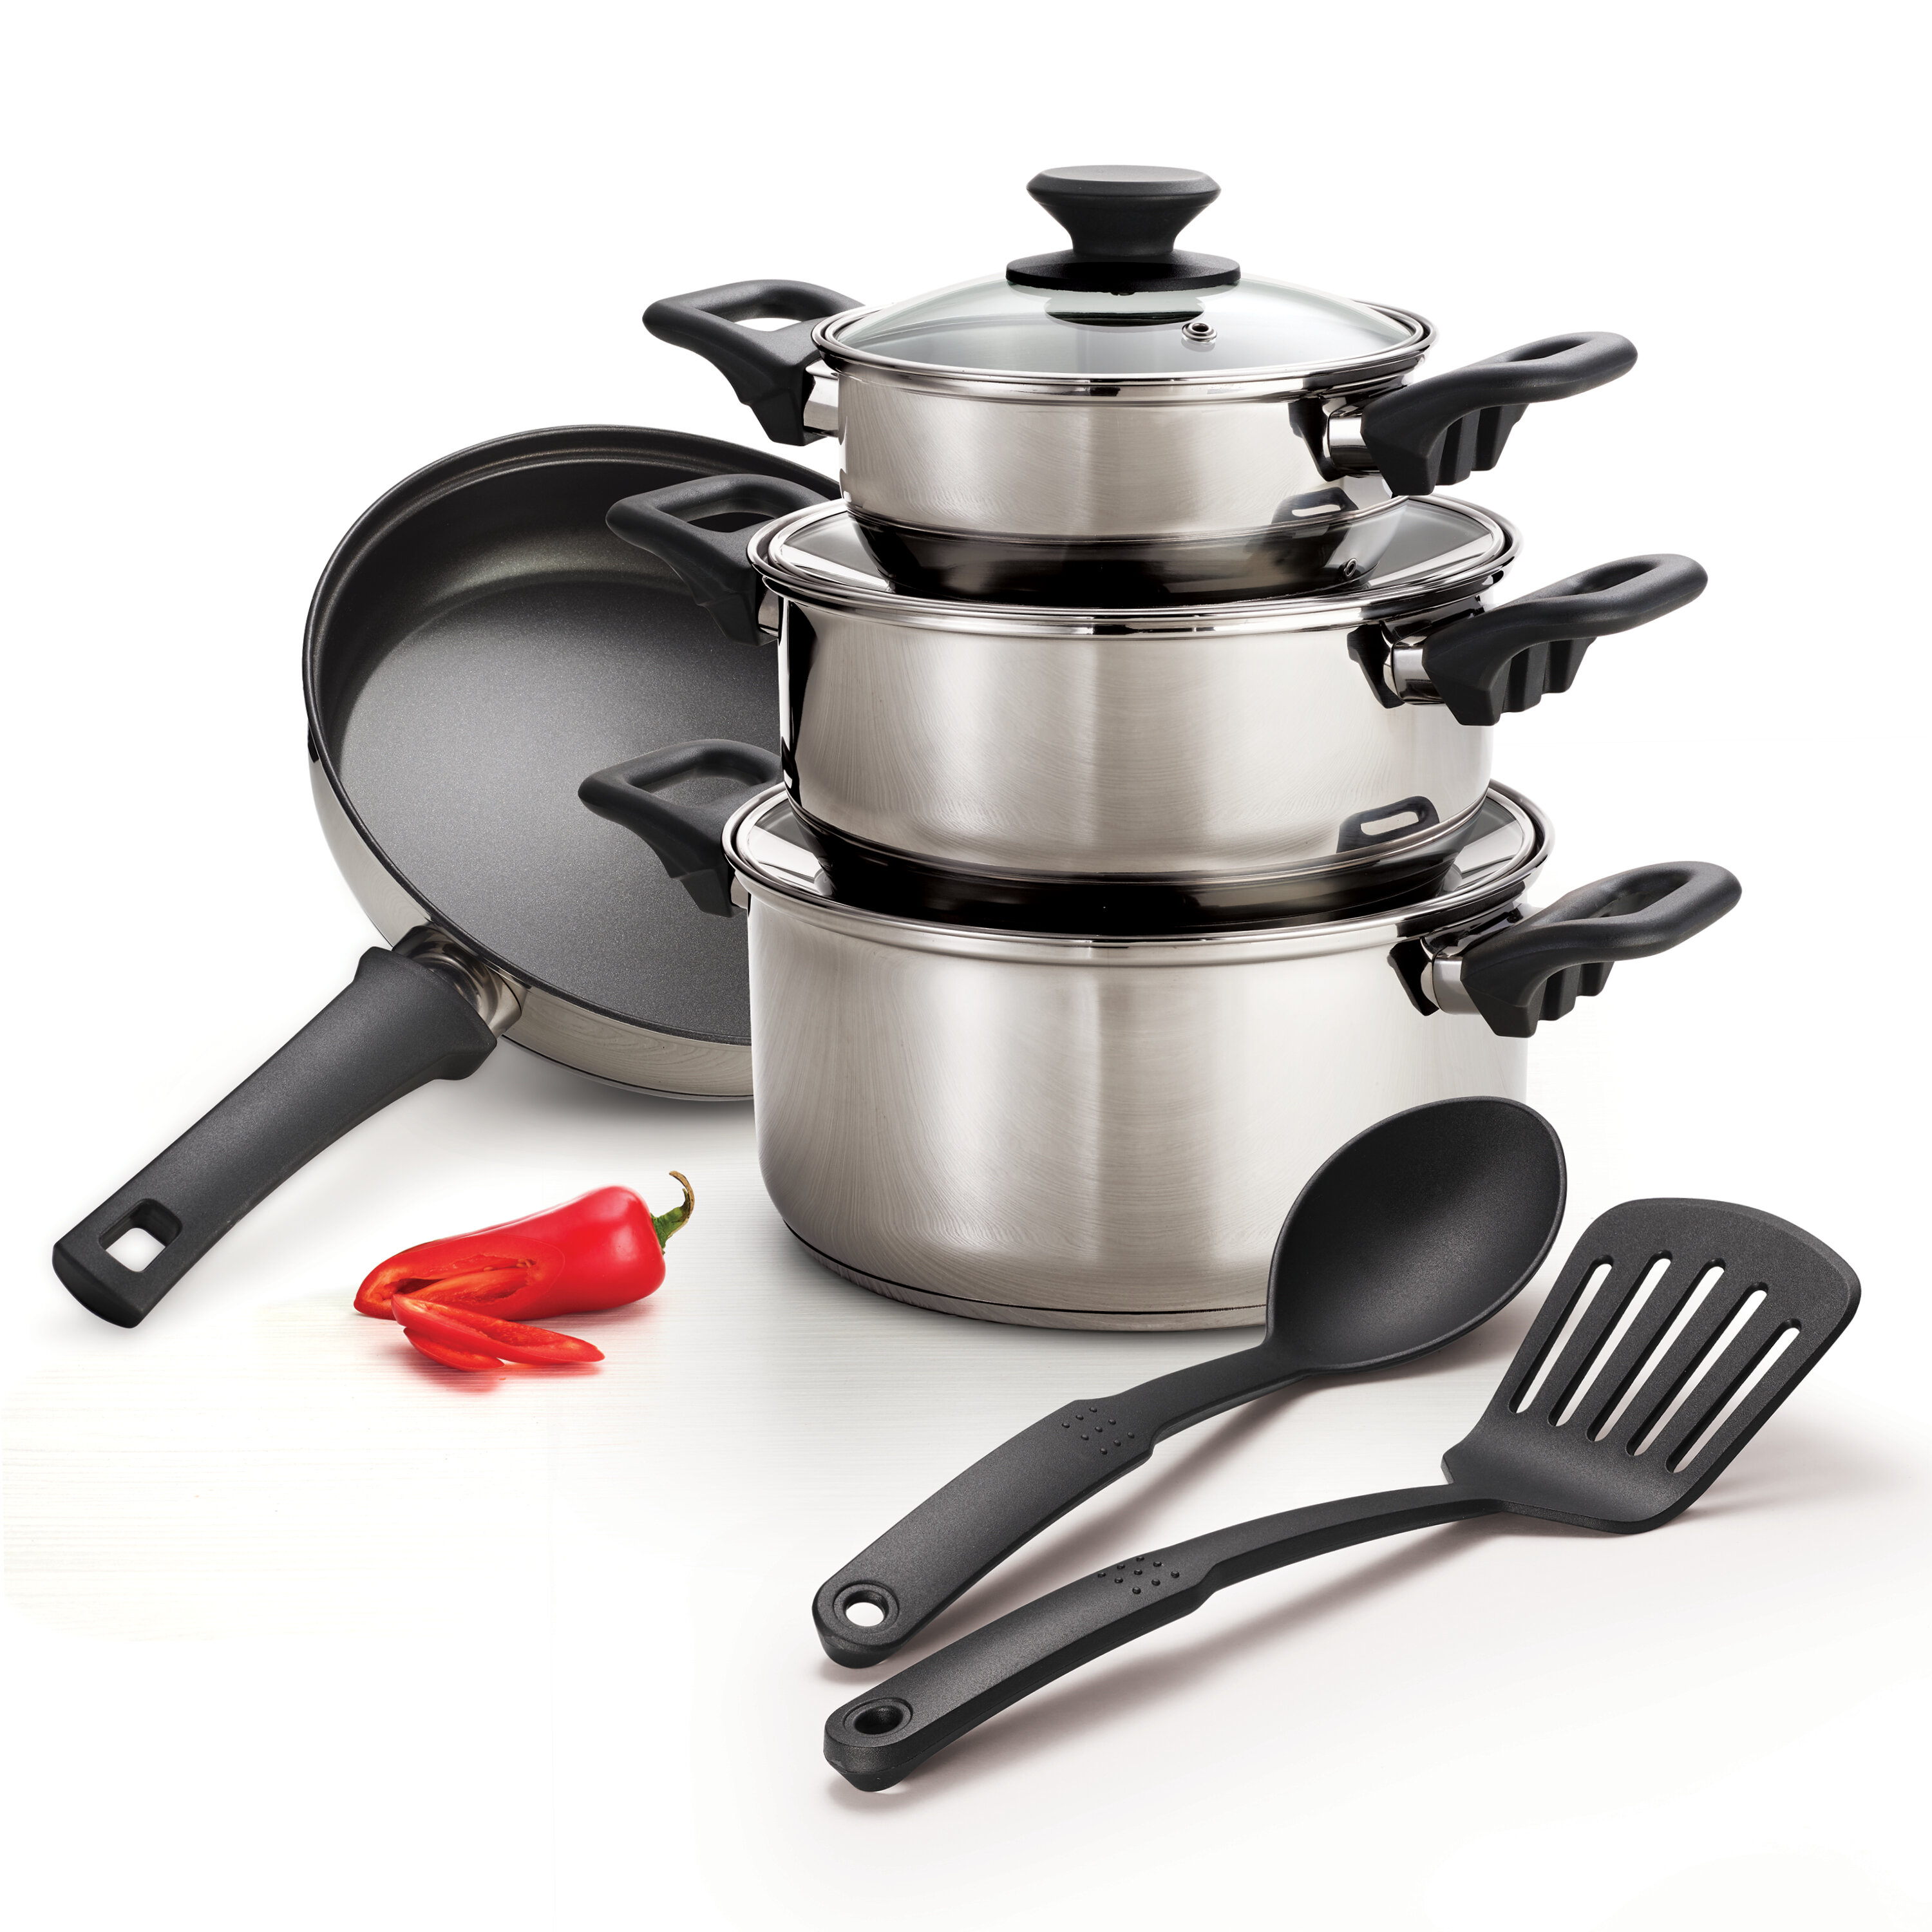 Tramontina 9 Pc Stainless Steel Cookware Set & Reviews